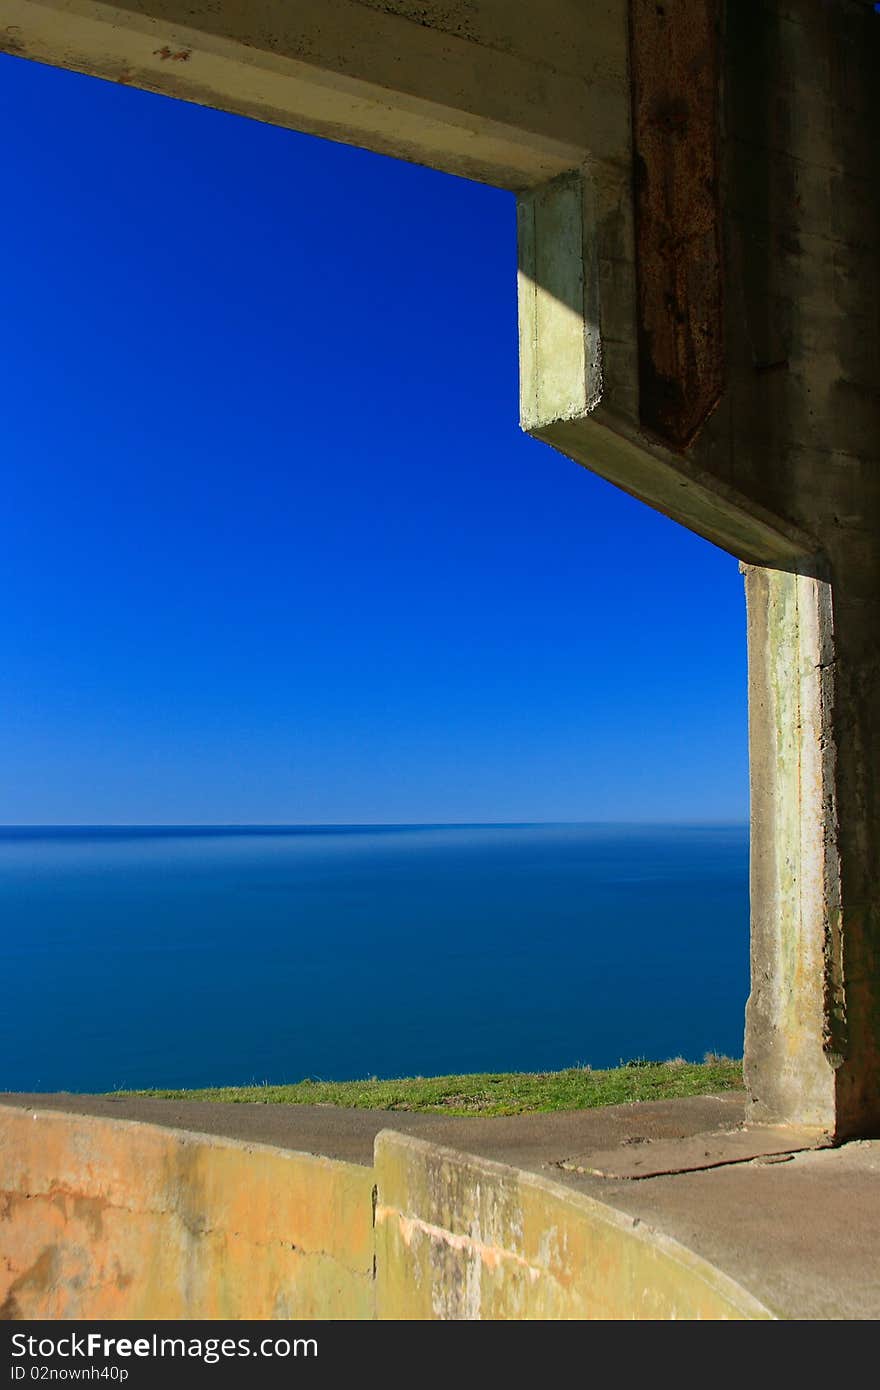 The view out from a World War 2 gun emplacement, Godley Head, New Zealand. The view out from a World War 2 gun emplacement, Godley Head, New Zealand.